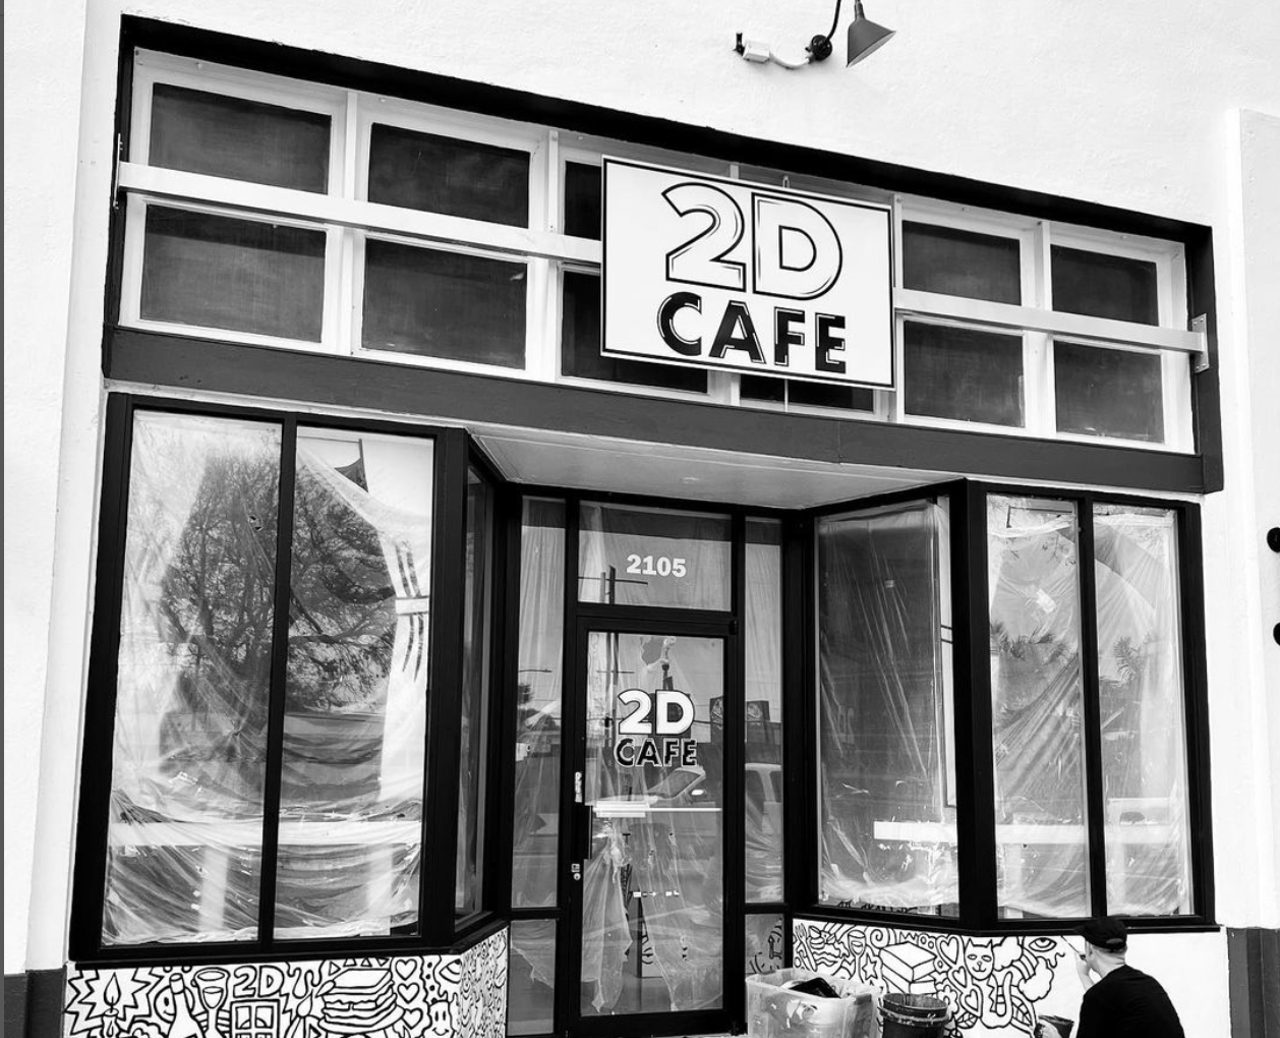 2D Cafe  
2105 Central Ave.
As one of many new spots to open this year in St. Pete’s Grand Central District, 2D Cafe is the only one where its patrons are invited to “be the art.” Inspired by similar concepts in Japan and Europe, 2D Cafe is an immersive experience which surrounds customers in a black and white, two-dimensional cartoon environment—its only pops of color coming from the European-style pastries and dishes, coffees, teas and patrons.
Photo via @the2dcafe/Instagram